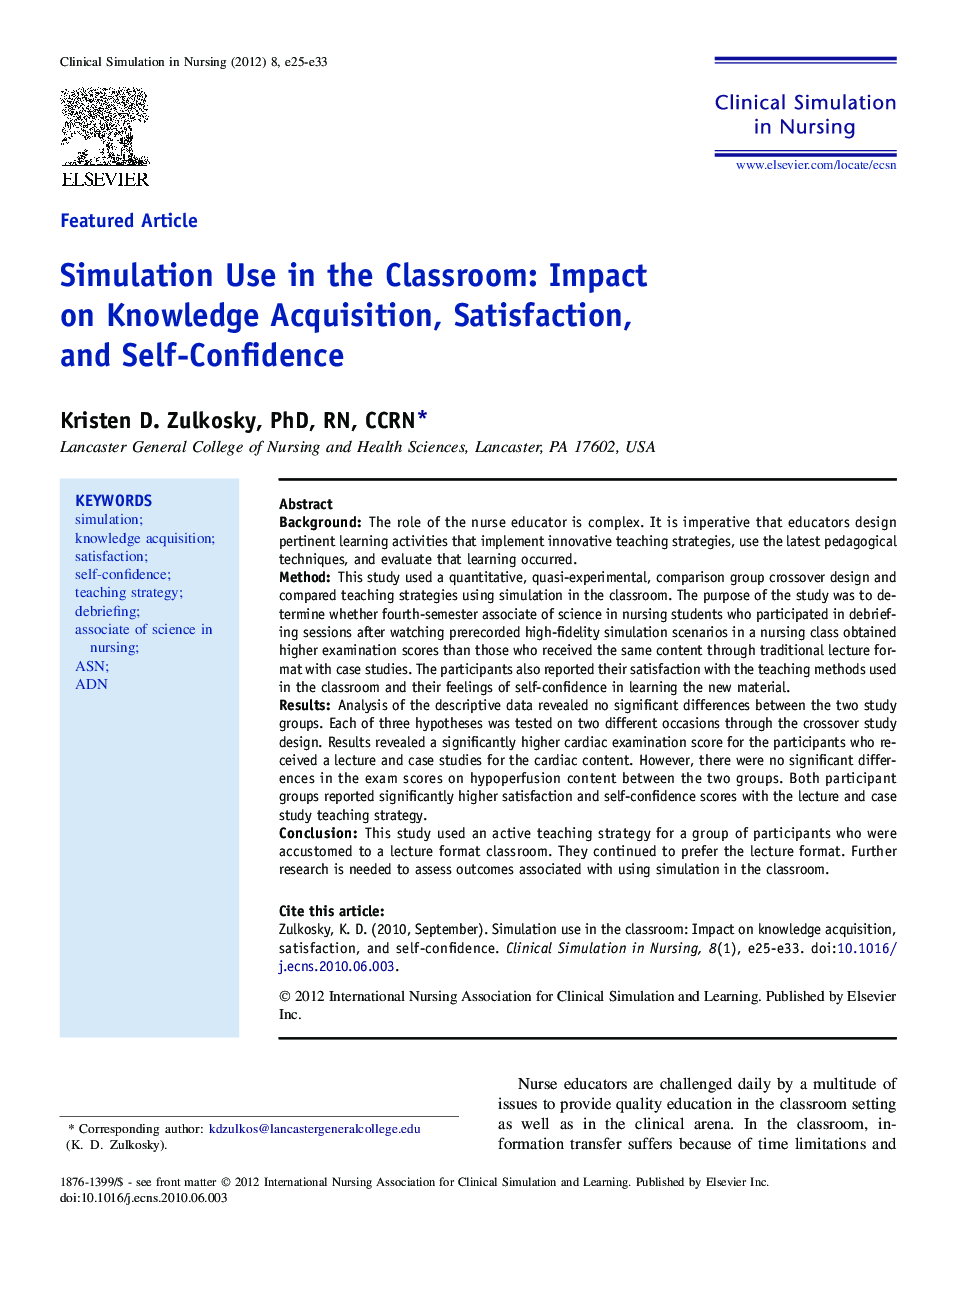 Simulation Use in the Classroom: Impact on Knowledge Acquisition, Satisfaction, and Self-Confidence